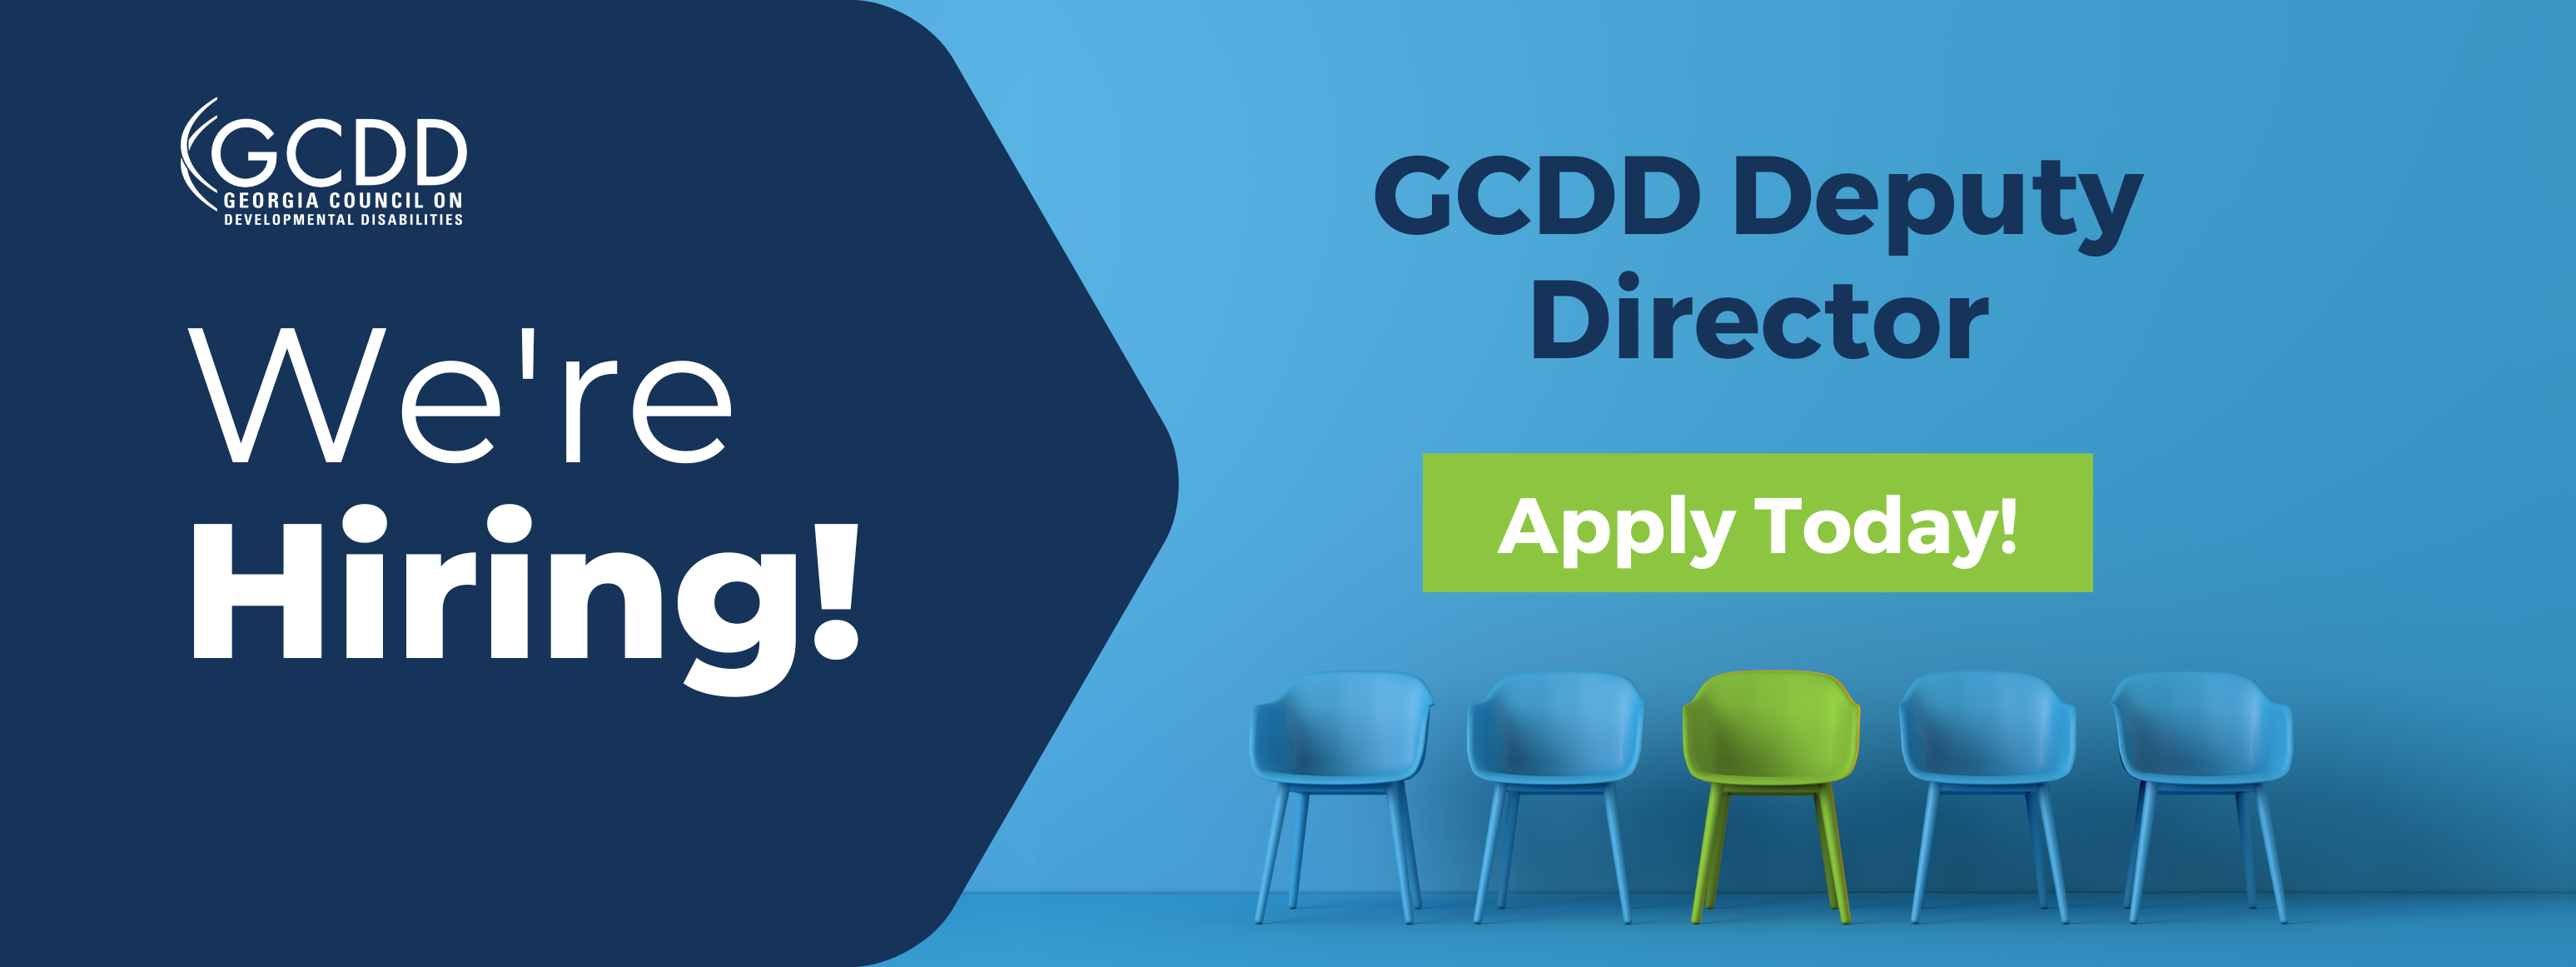 Apply today for GCDD's Deputy Director position!